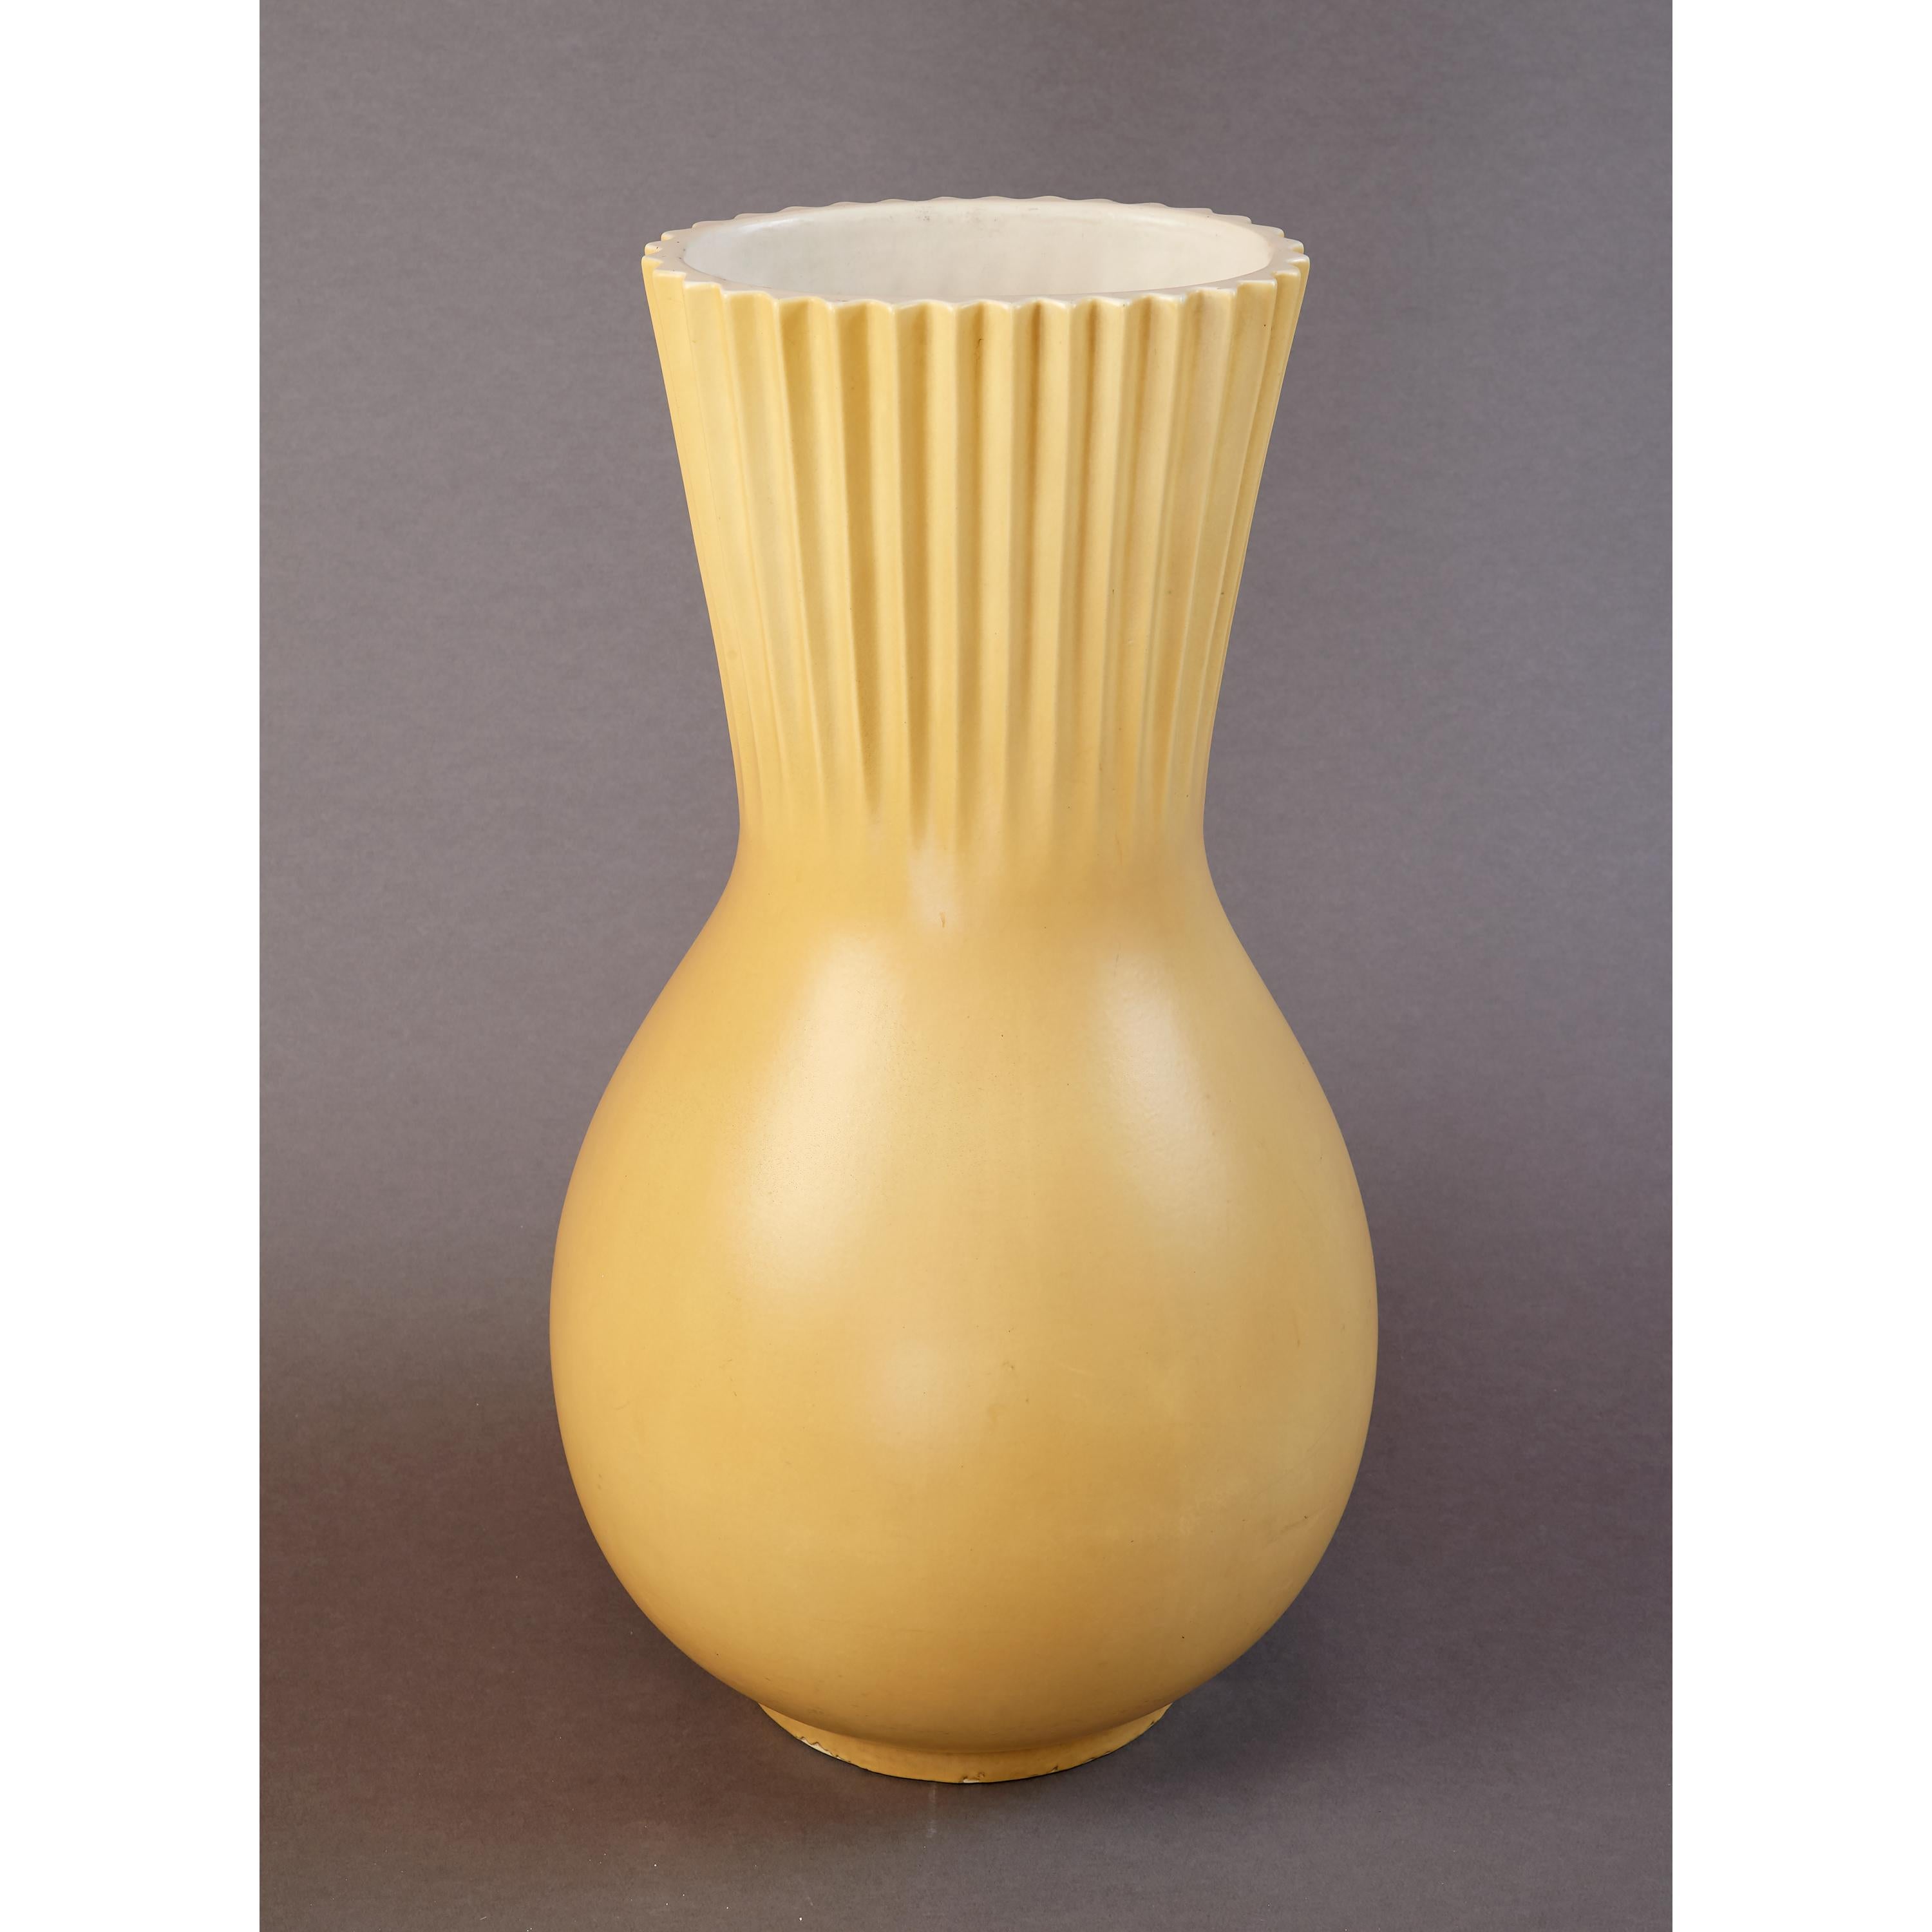 Giovanni Gariboldi (1908-1971 )
An imposing and tall vase or umbrella stand in glazed ceramic by Giovanni Gariboldi for Richard Ginori
Italy, 1940's
With maker's mark underneath
Measures: 24 H x 13 W x 12 D.